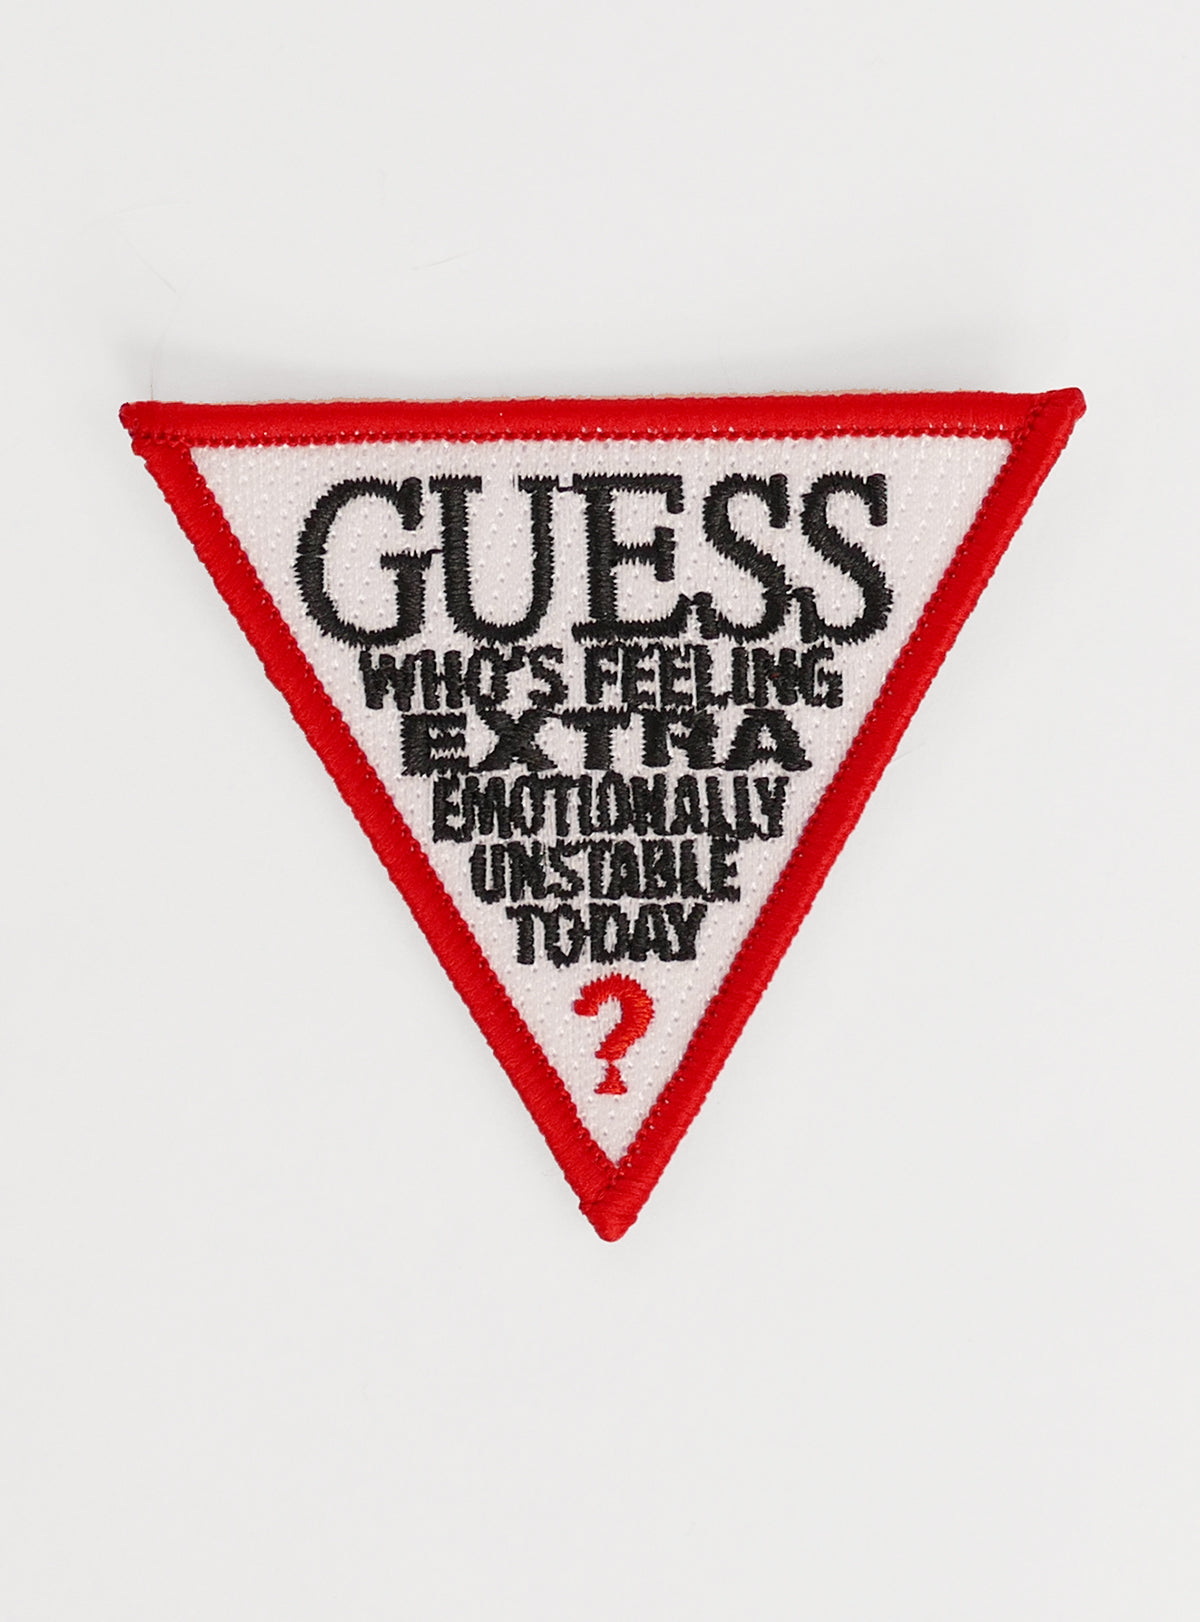 Guess Who Patch